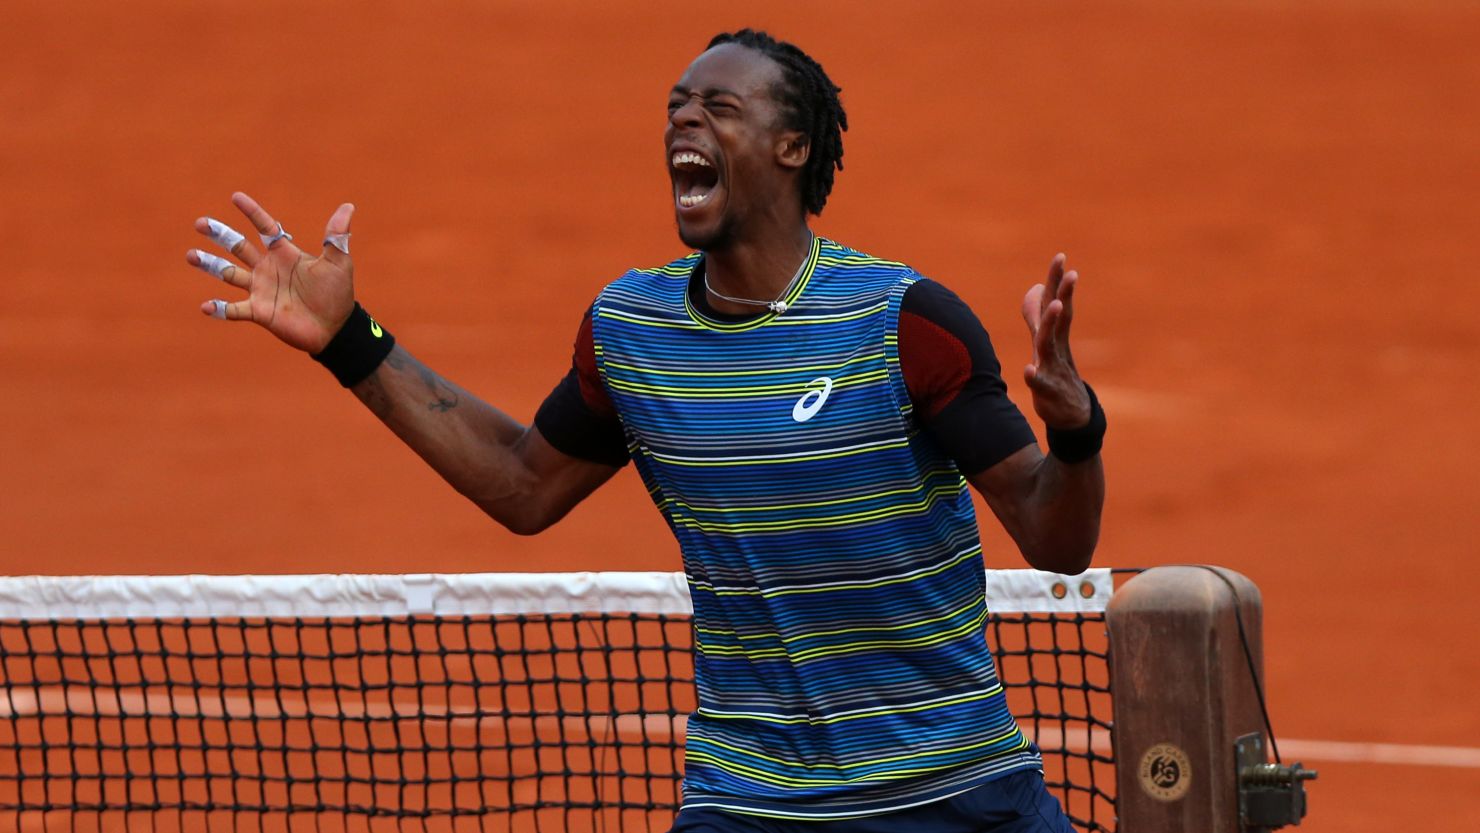 Wild card Gael Monfils celebrates his unexpected victory over fifth seed Tomas Berdych of Czech Republic.